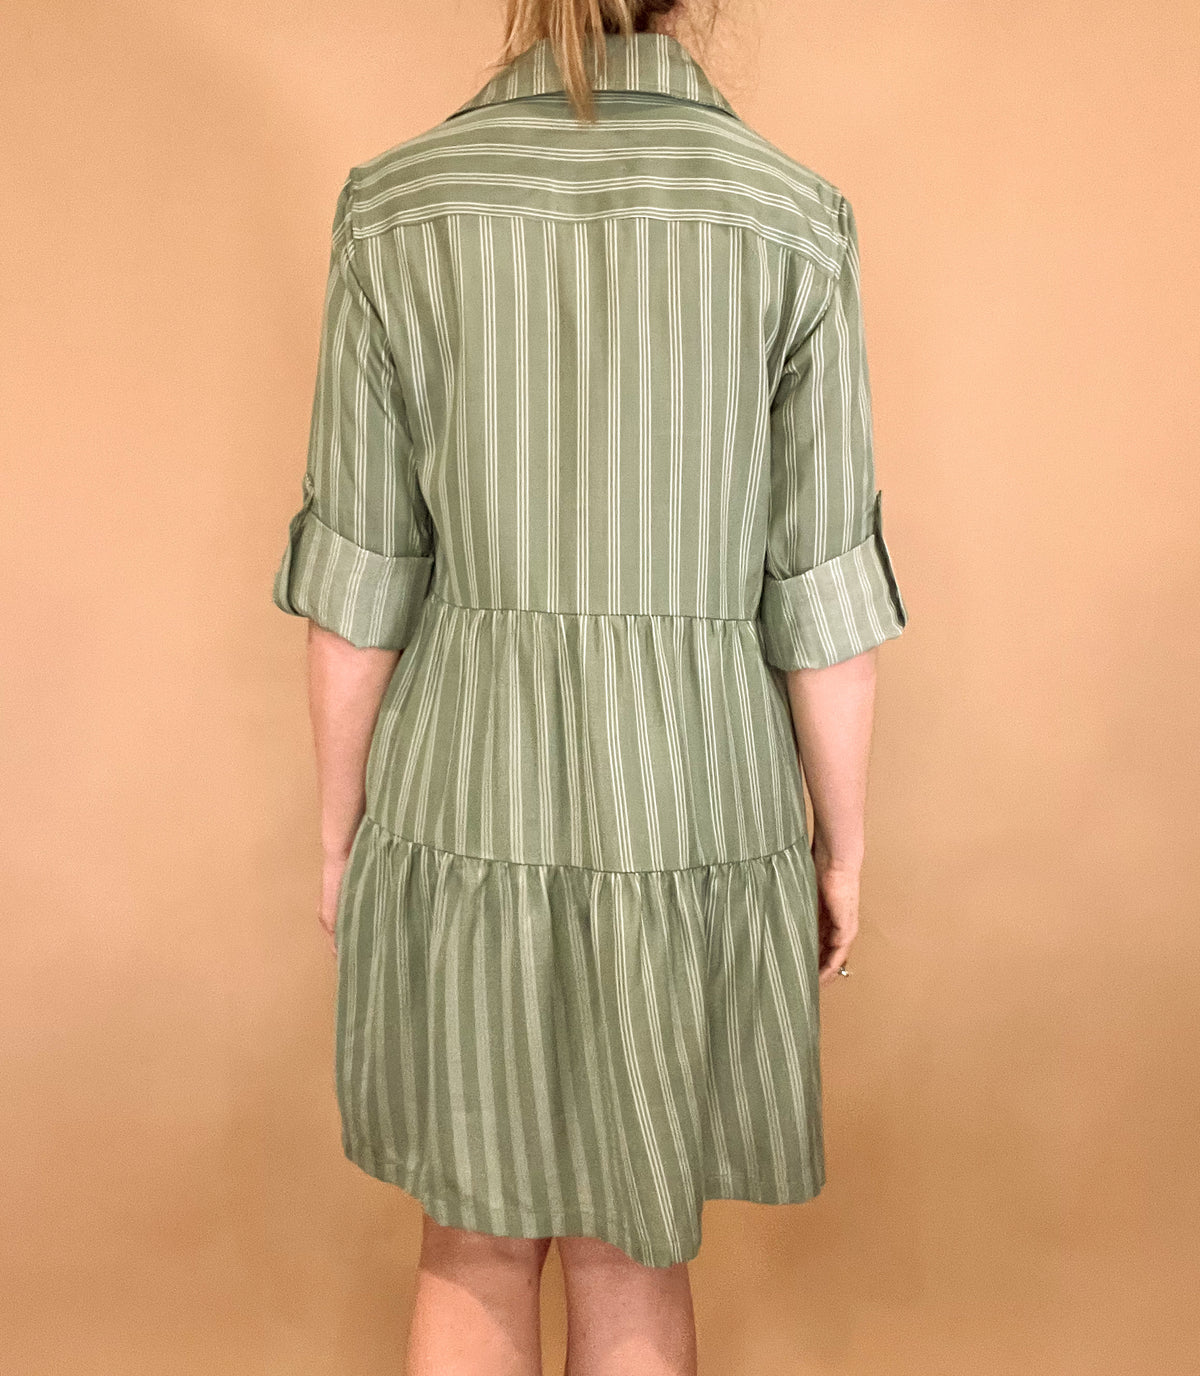 Introducing our Breezy Dress, the epitome of effortless elegance. Made from silky Tencel fabric, this button up tiered dress features a classic white pinstripe design and functional buttoned front pockets. With the ability to roll and secure the sleeves with a button tab, it's the perfect dress for any occasion. Available in blue or green.